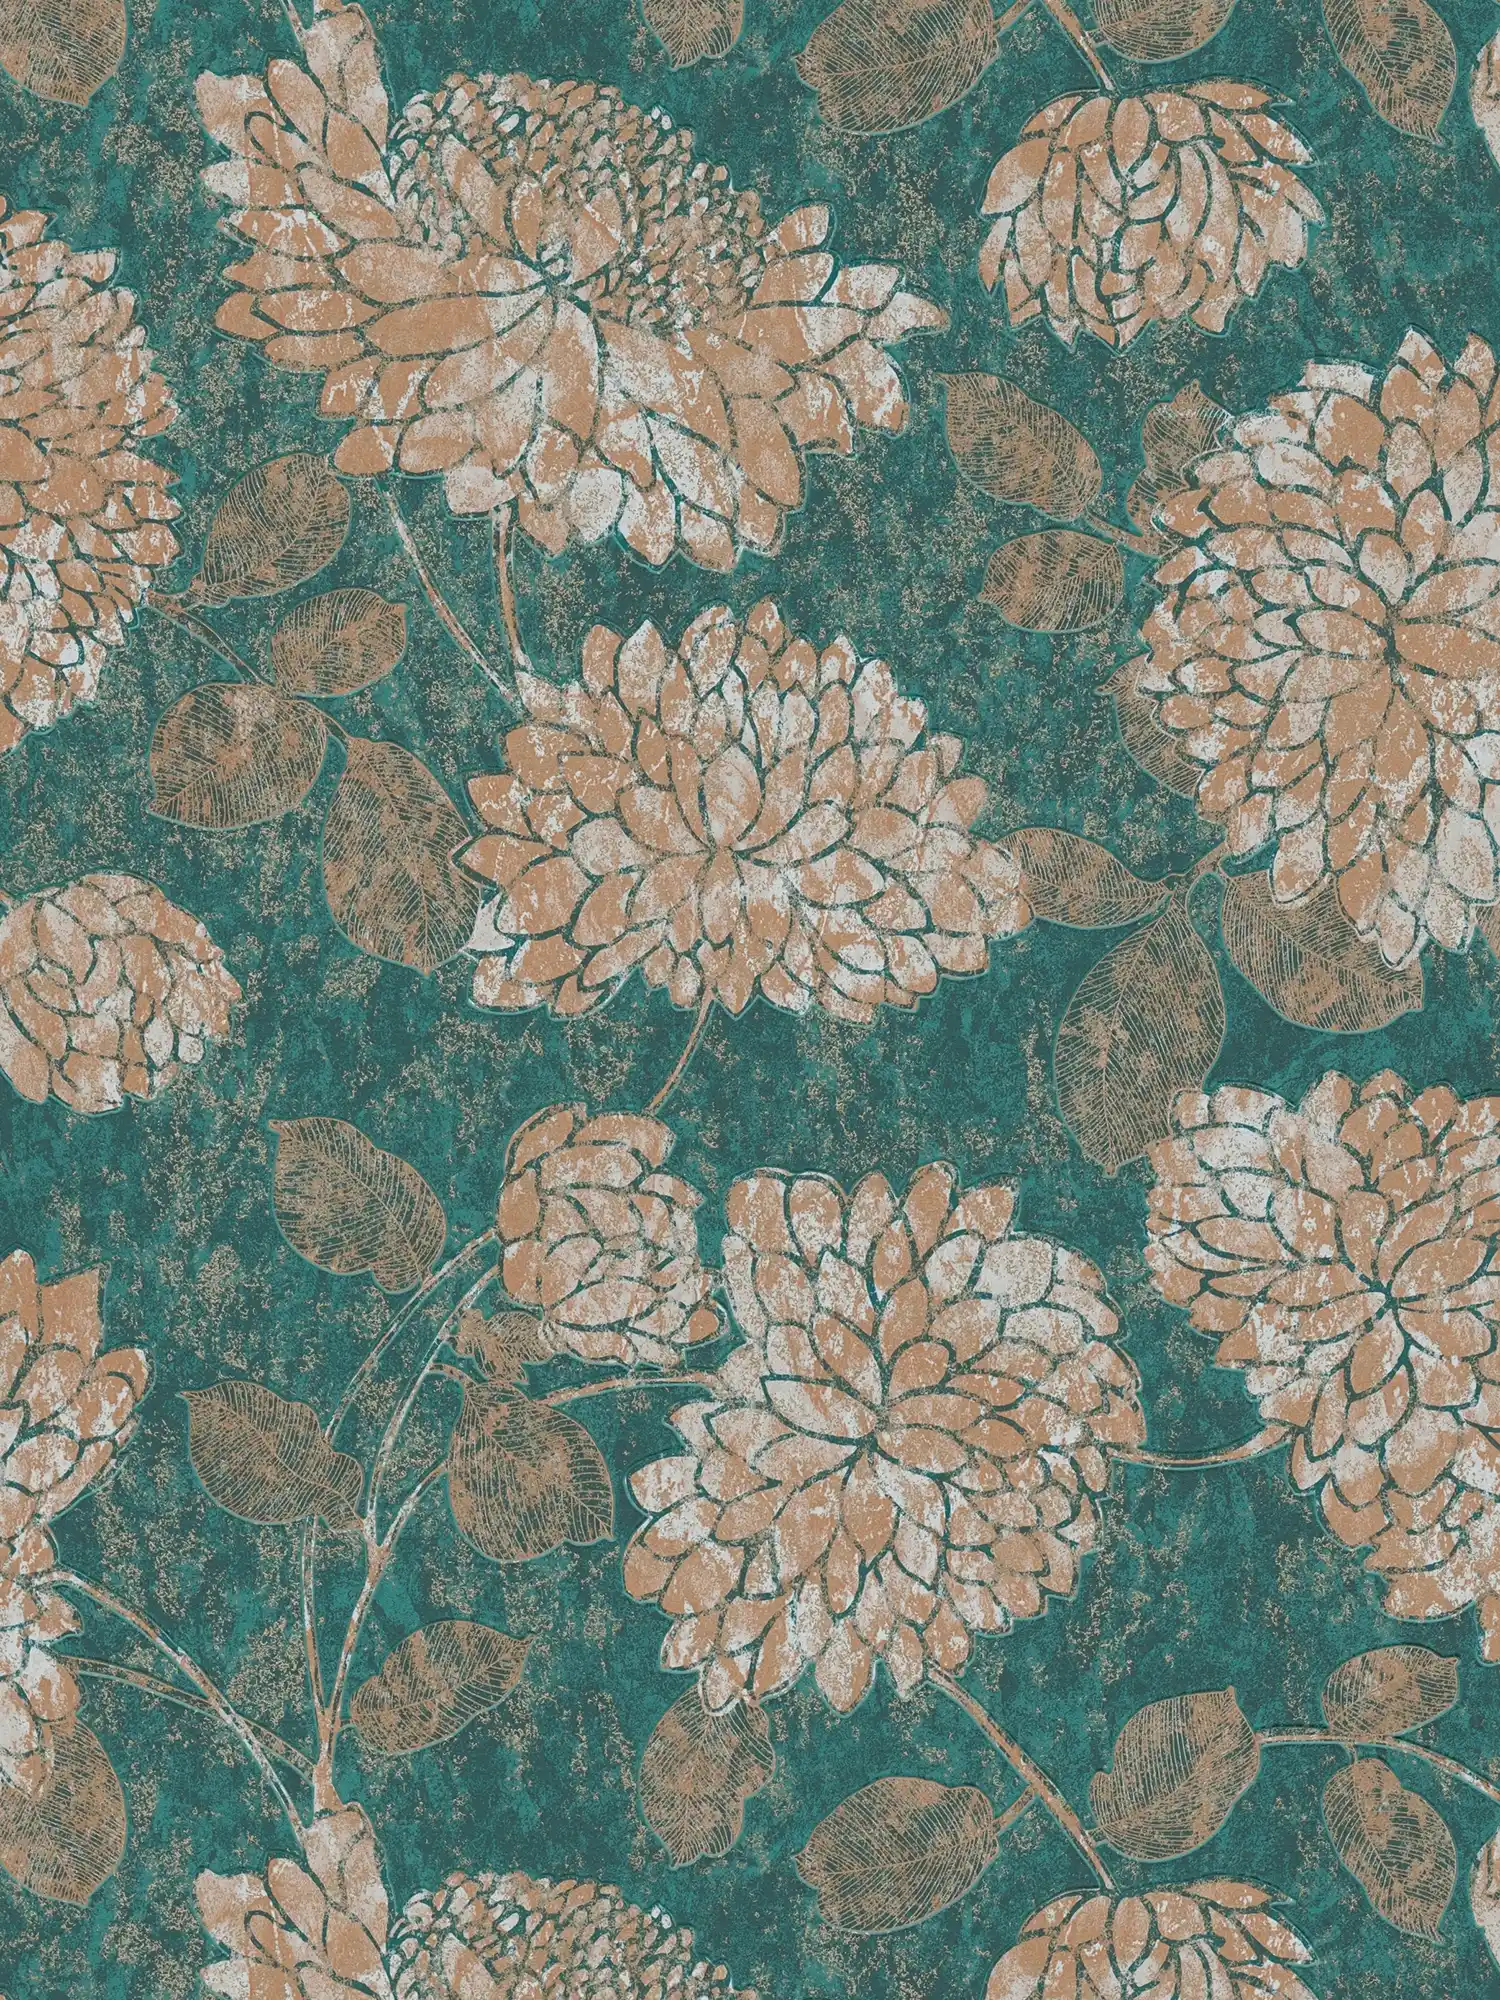 Floral wallpaper with floral pattern slightly shiny - green, gold
